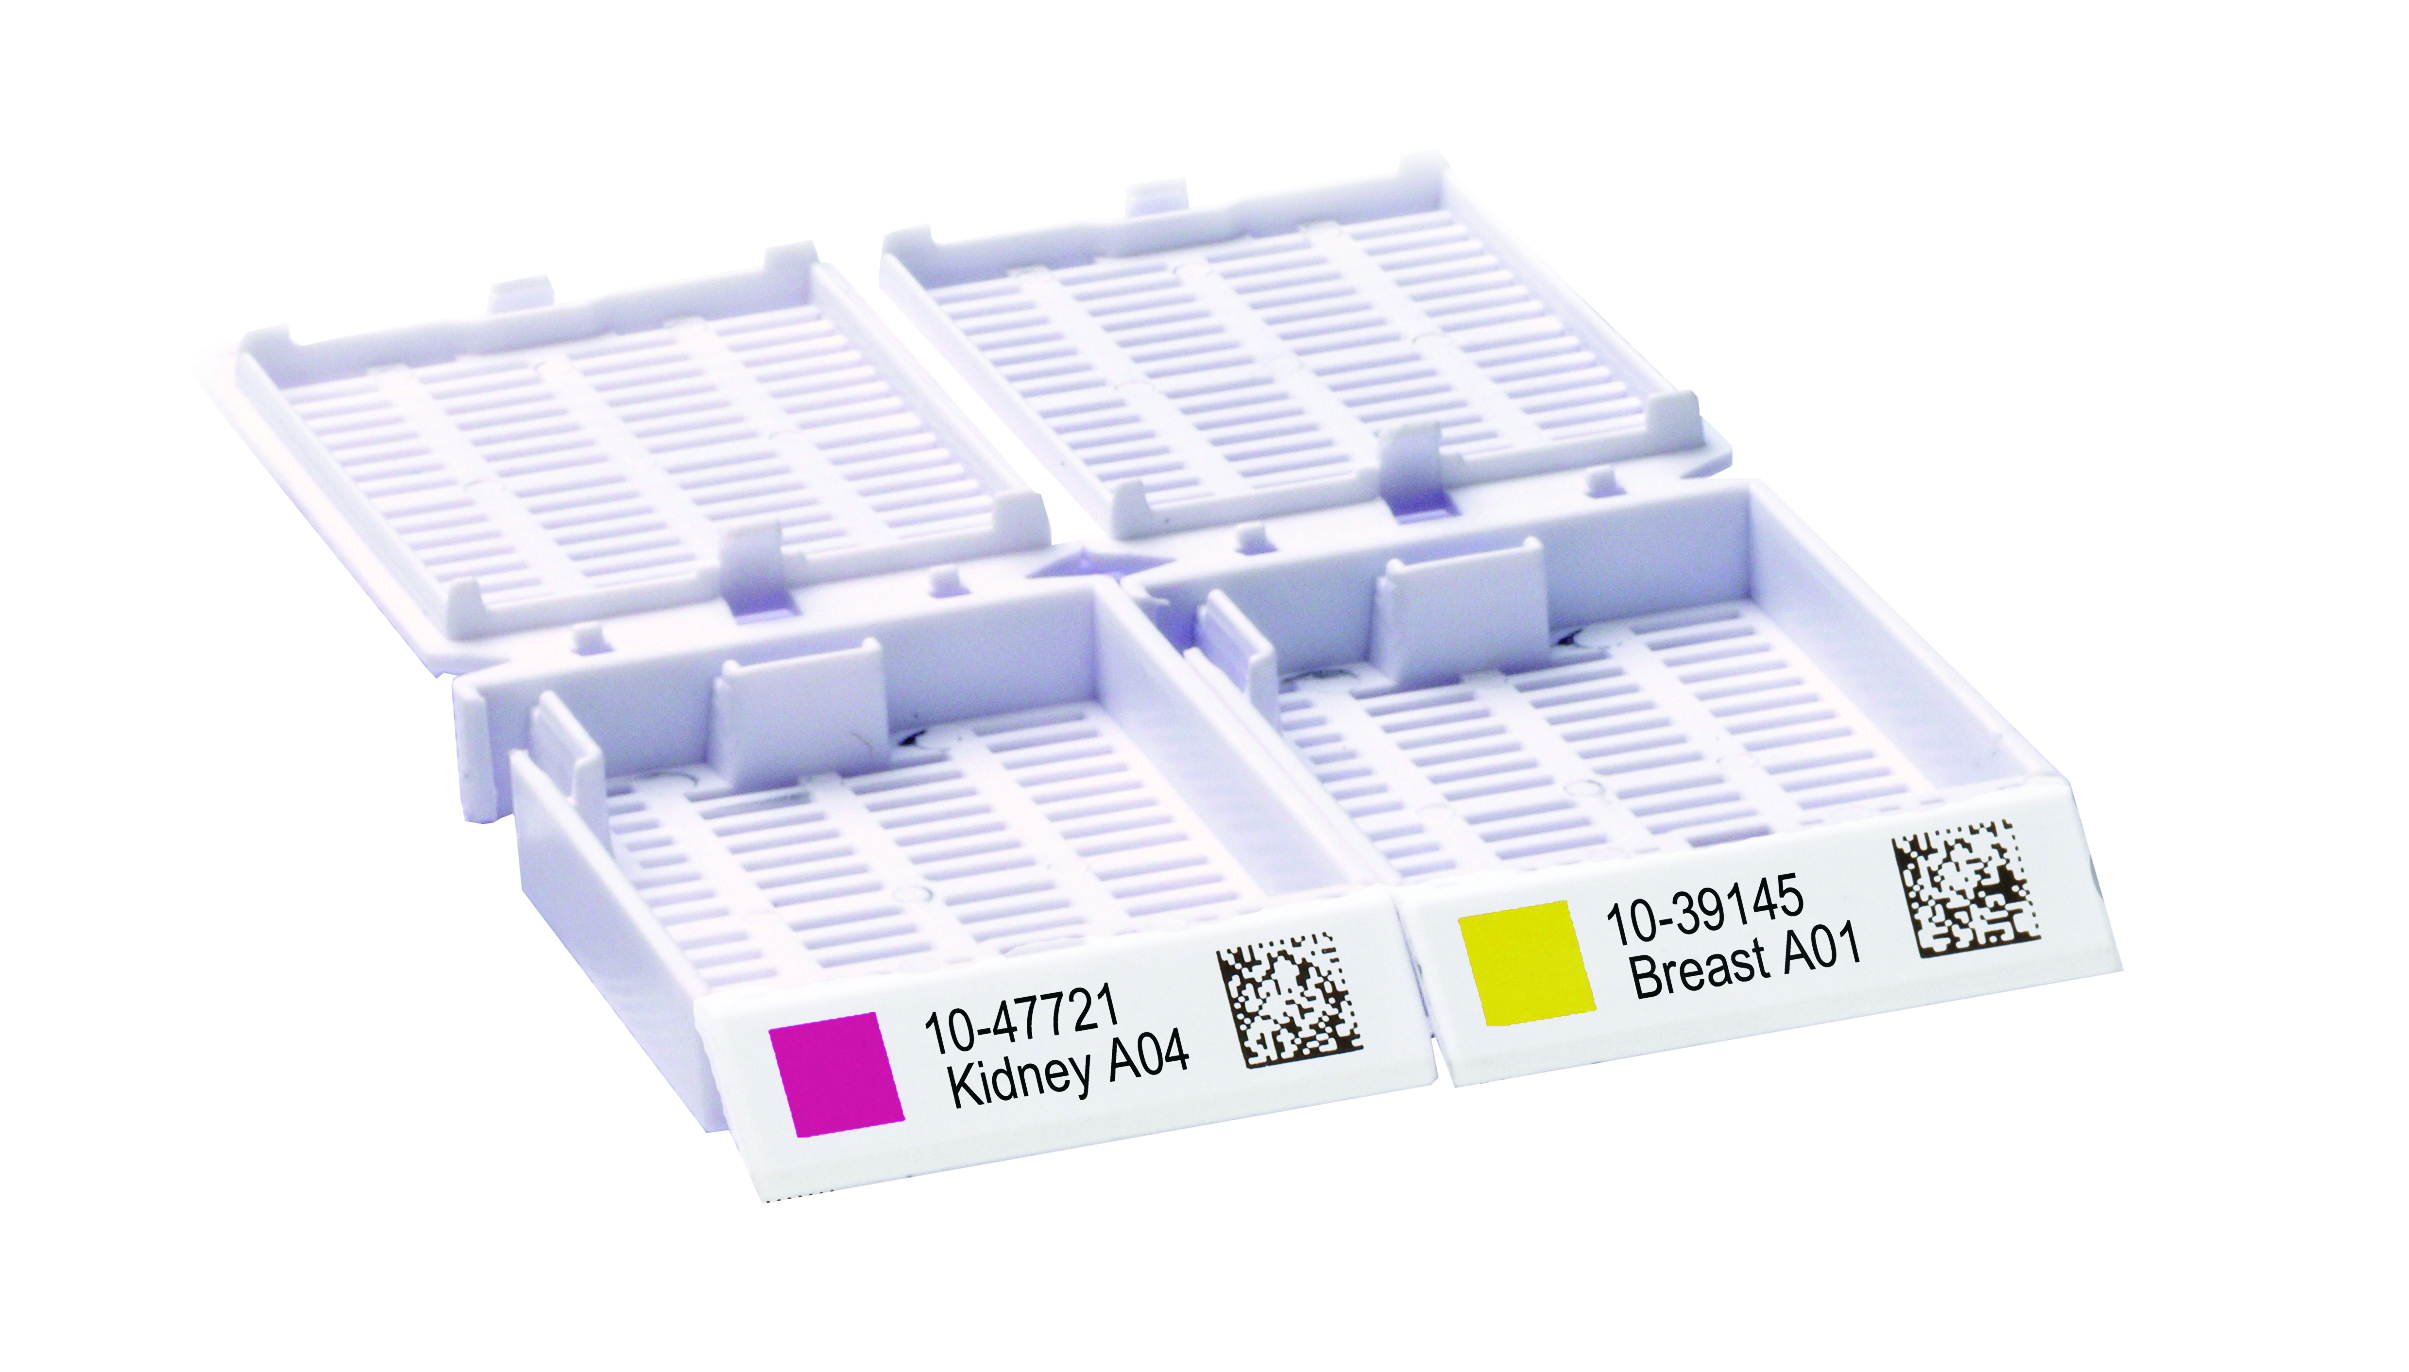 Print 2D bar codes and multiple text identifiers on tissue cassettes